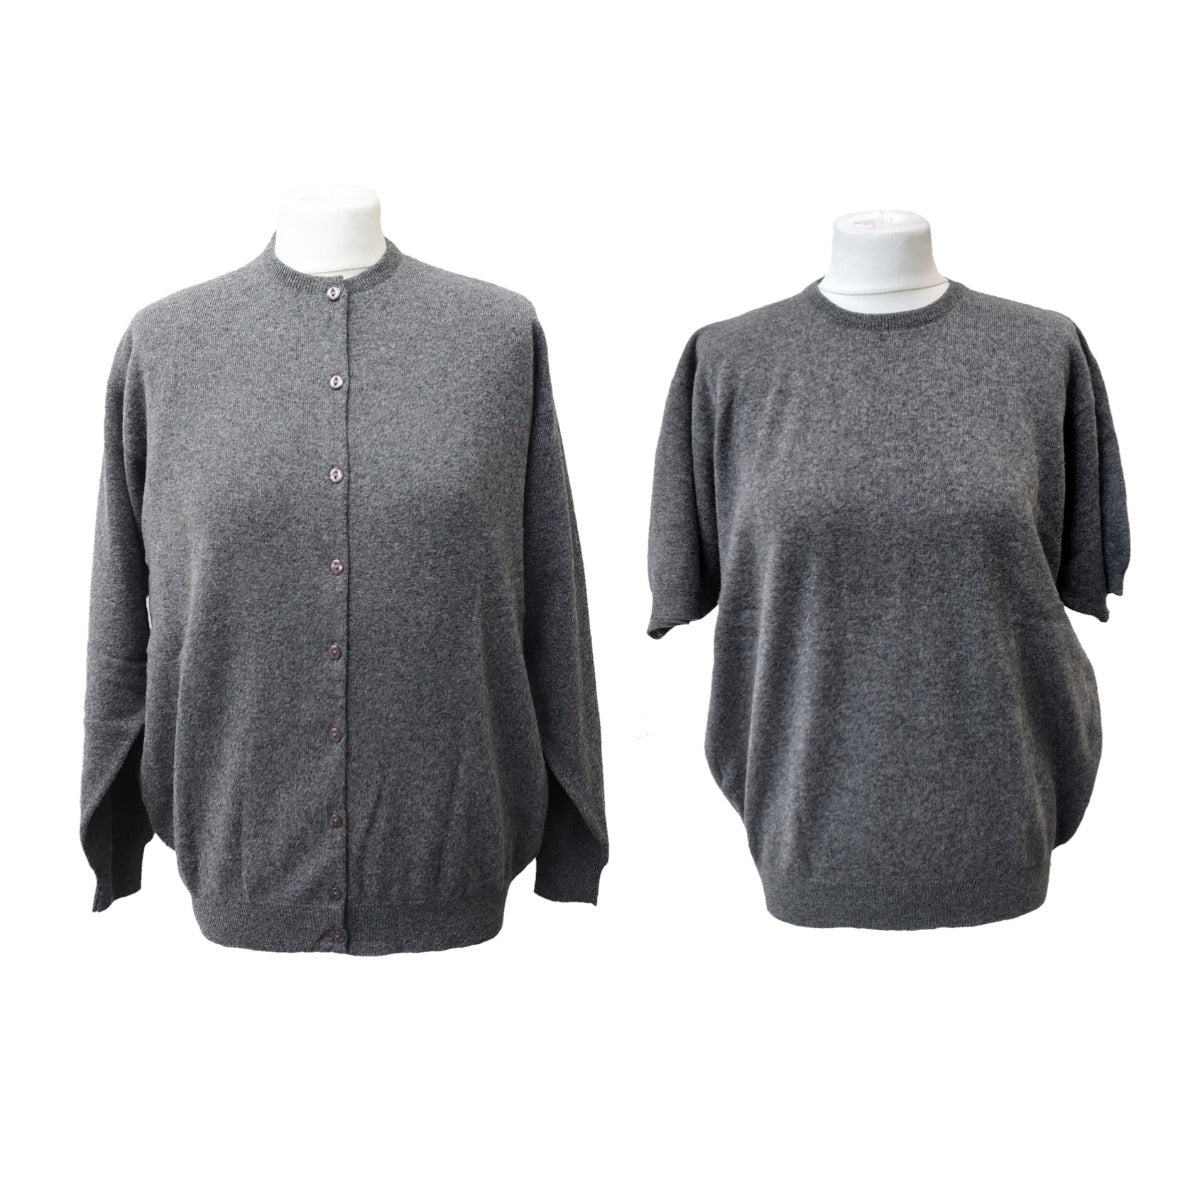 Ladies 100% Pure Cashmere Loose Fit, Drop Shoulder Twin Sweater Set - Mid Grey - XL